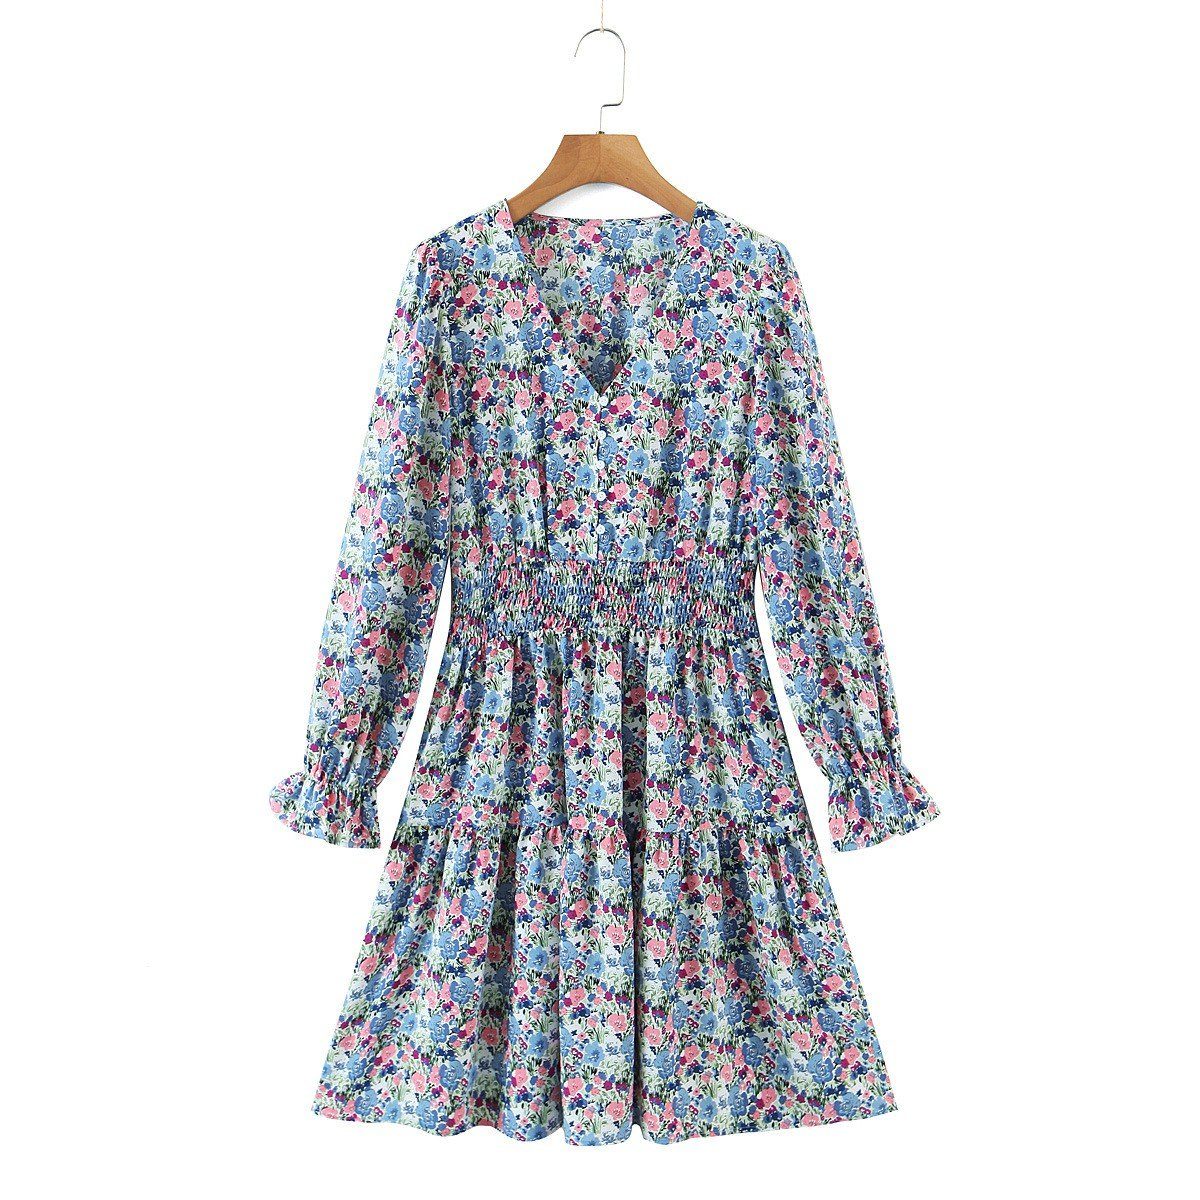 Floral Smock Dress w/ Buttons pink ripple 